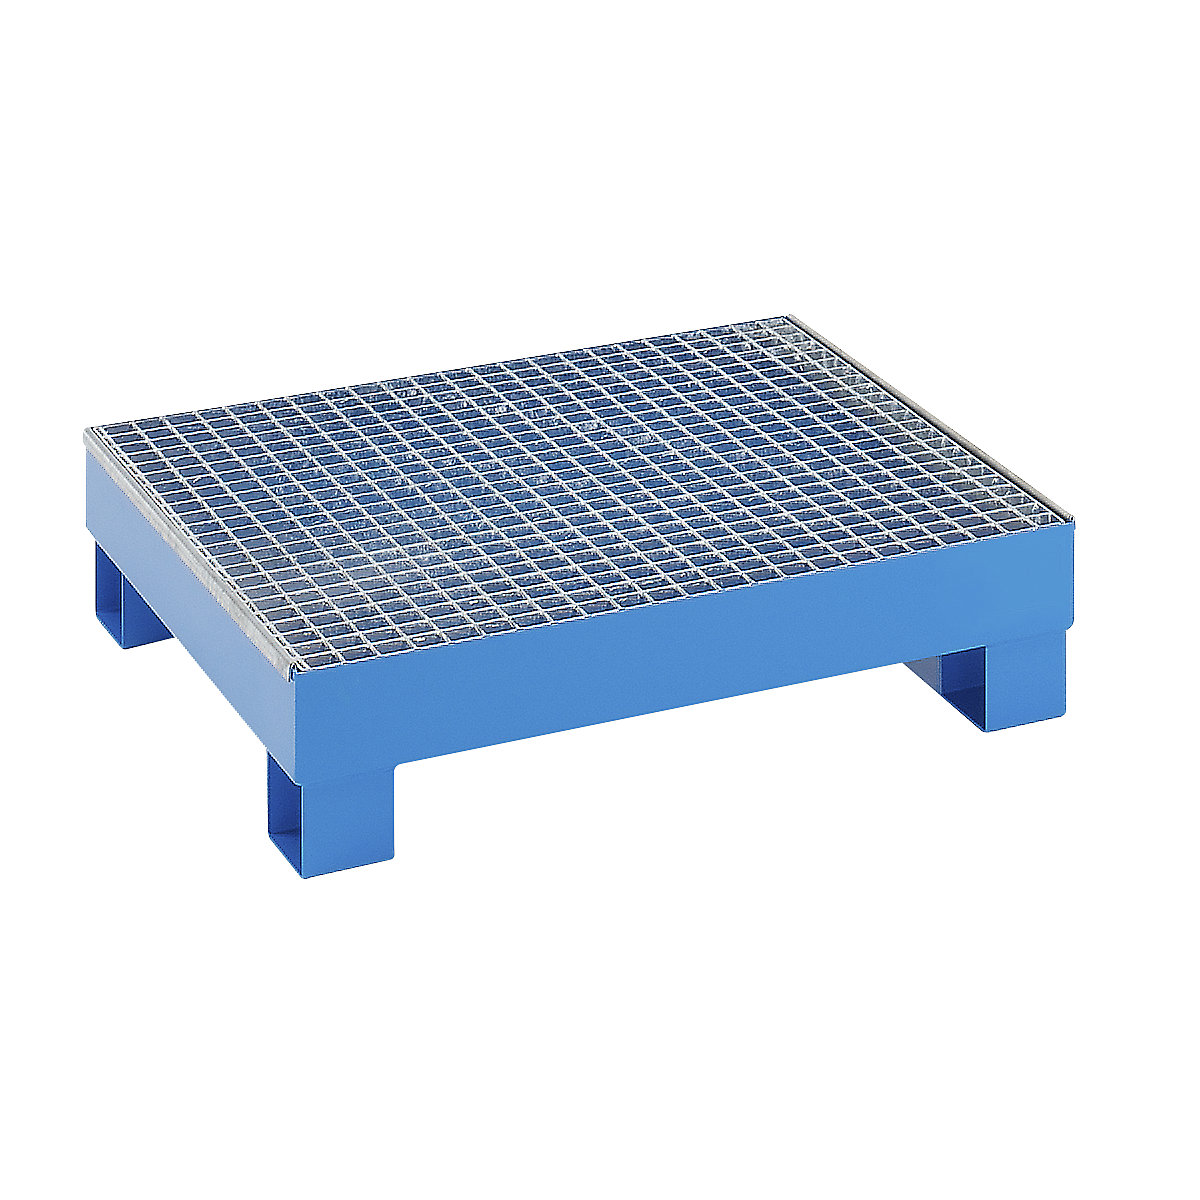 Sump tray for 60 l – eurokraft basic, LxWxH 800 x 900 x 220 mm, without certification, powder coated blue, with grate-3